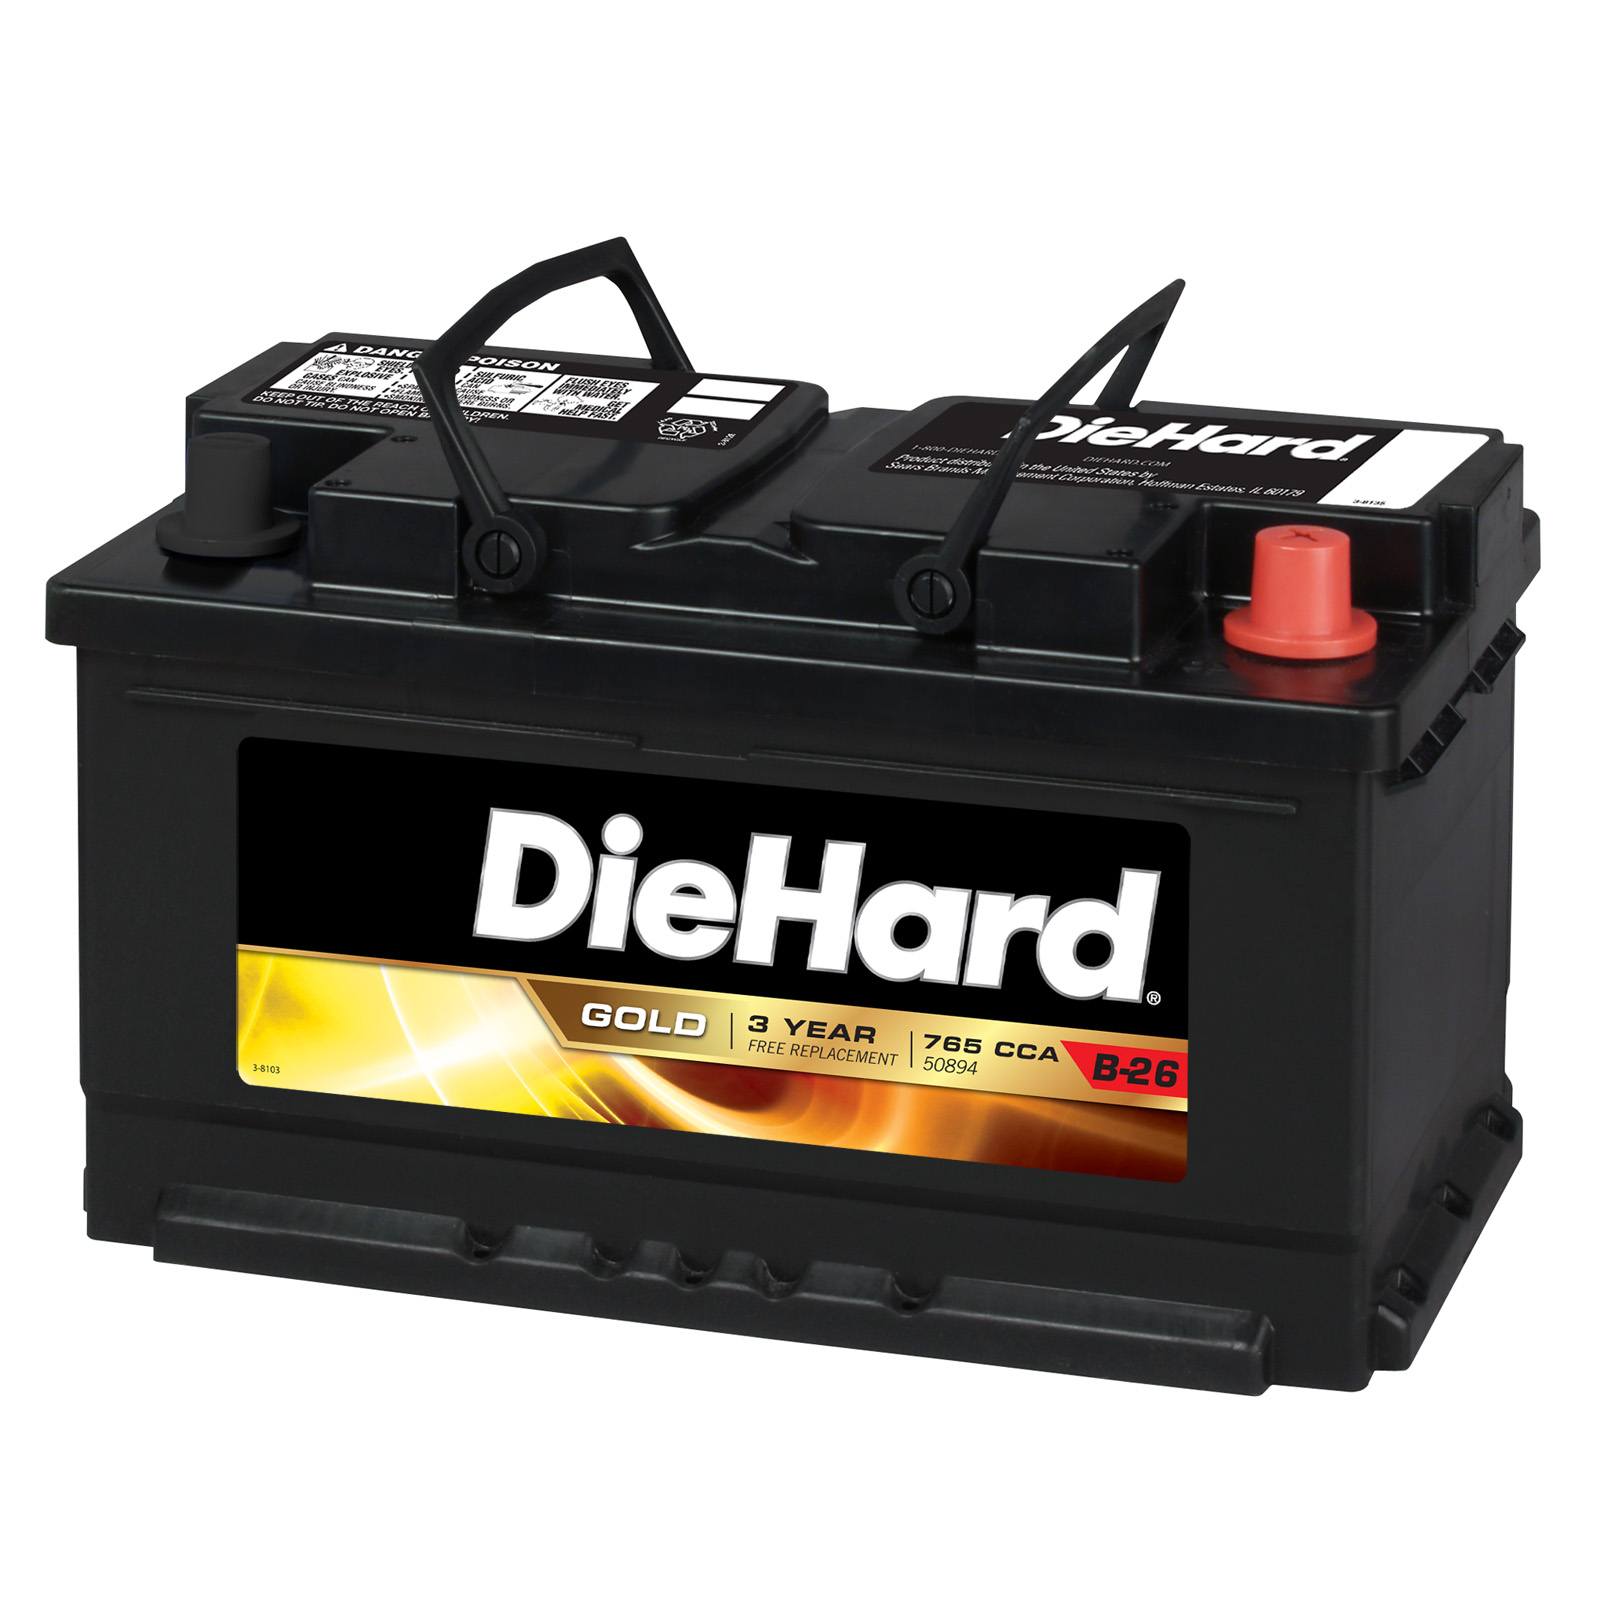 DieHard Gold Automotive Battery - Group Size EP-94R (Price with Exchange)